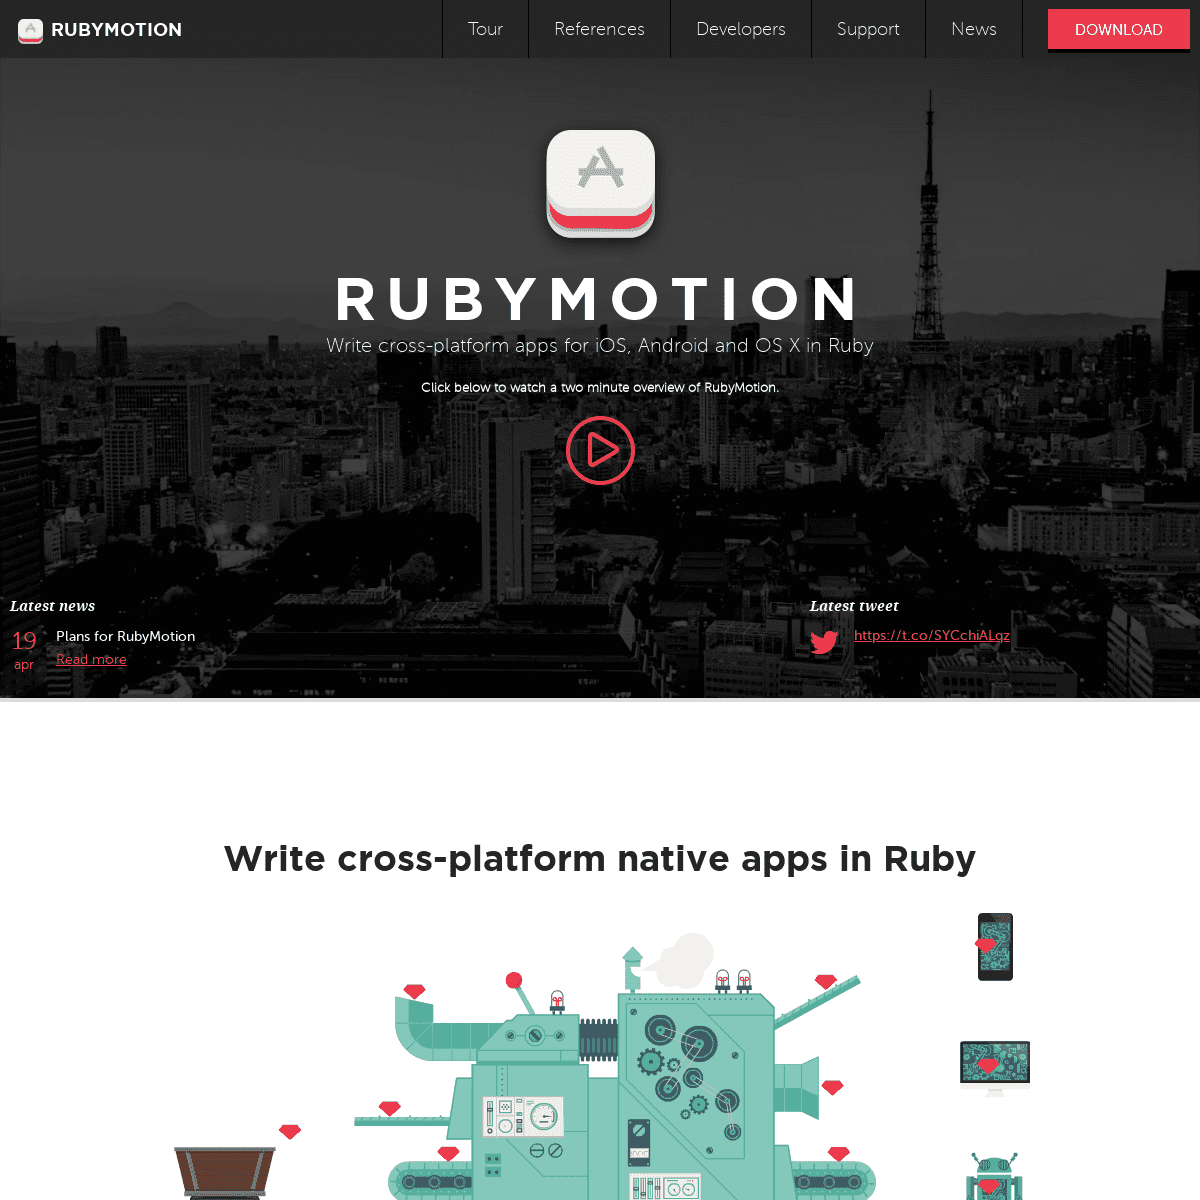 A complete backup of rubymotion.com